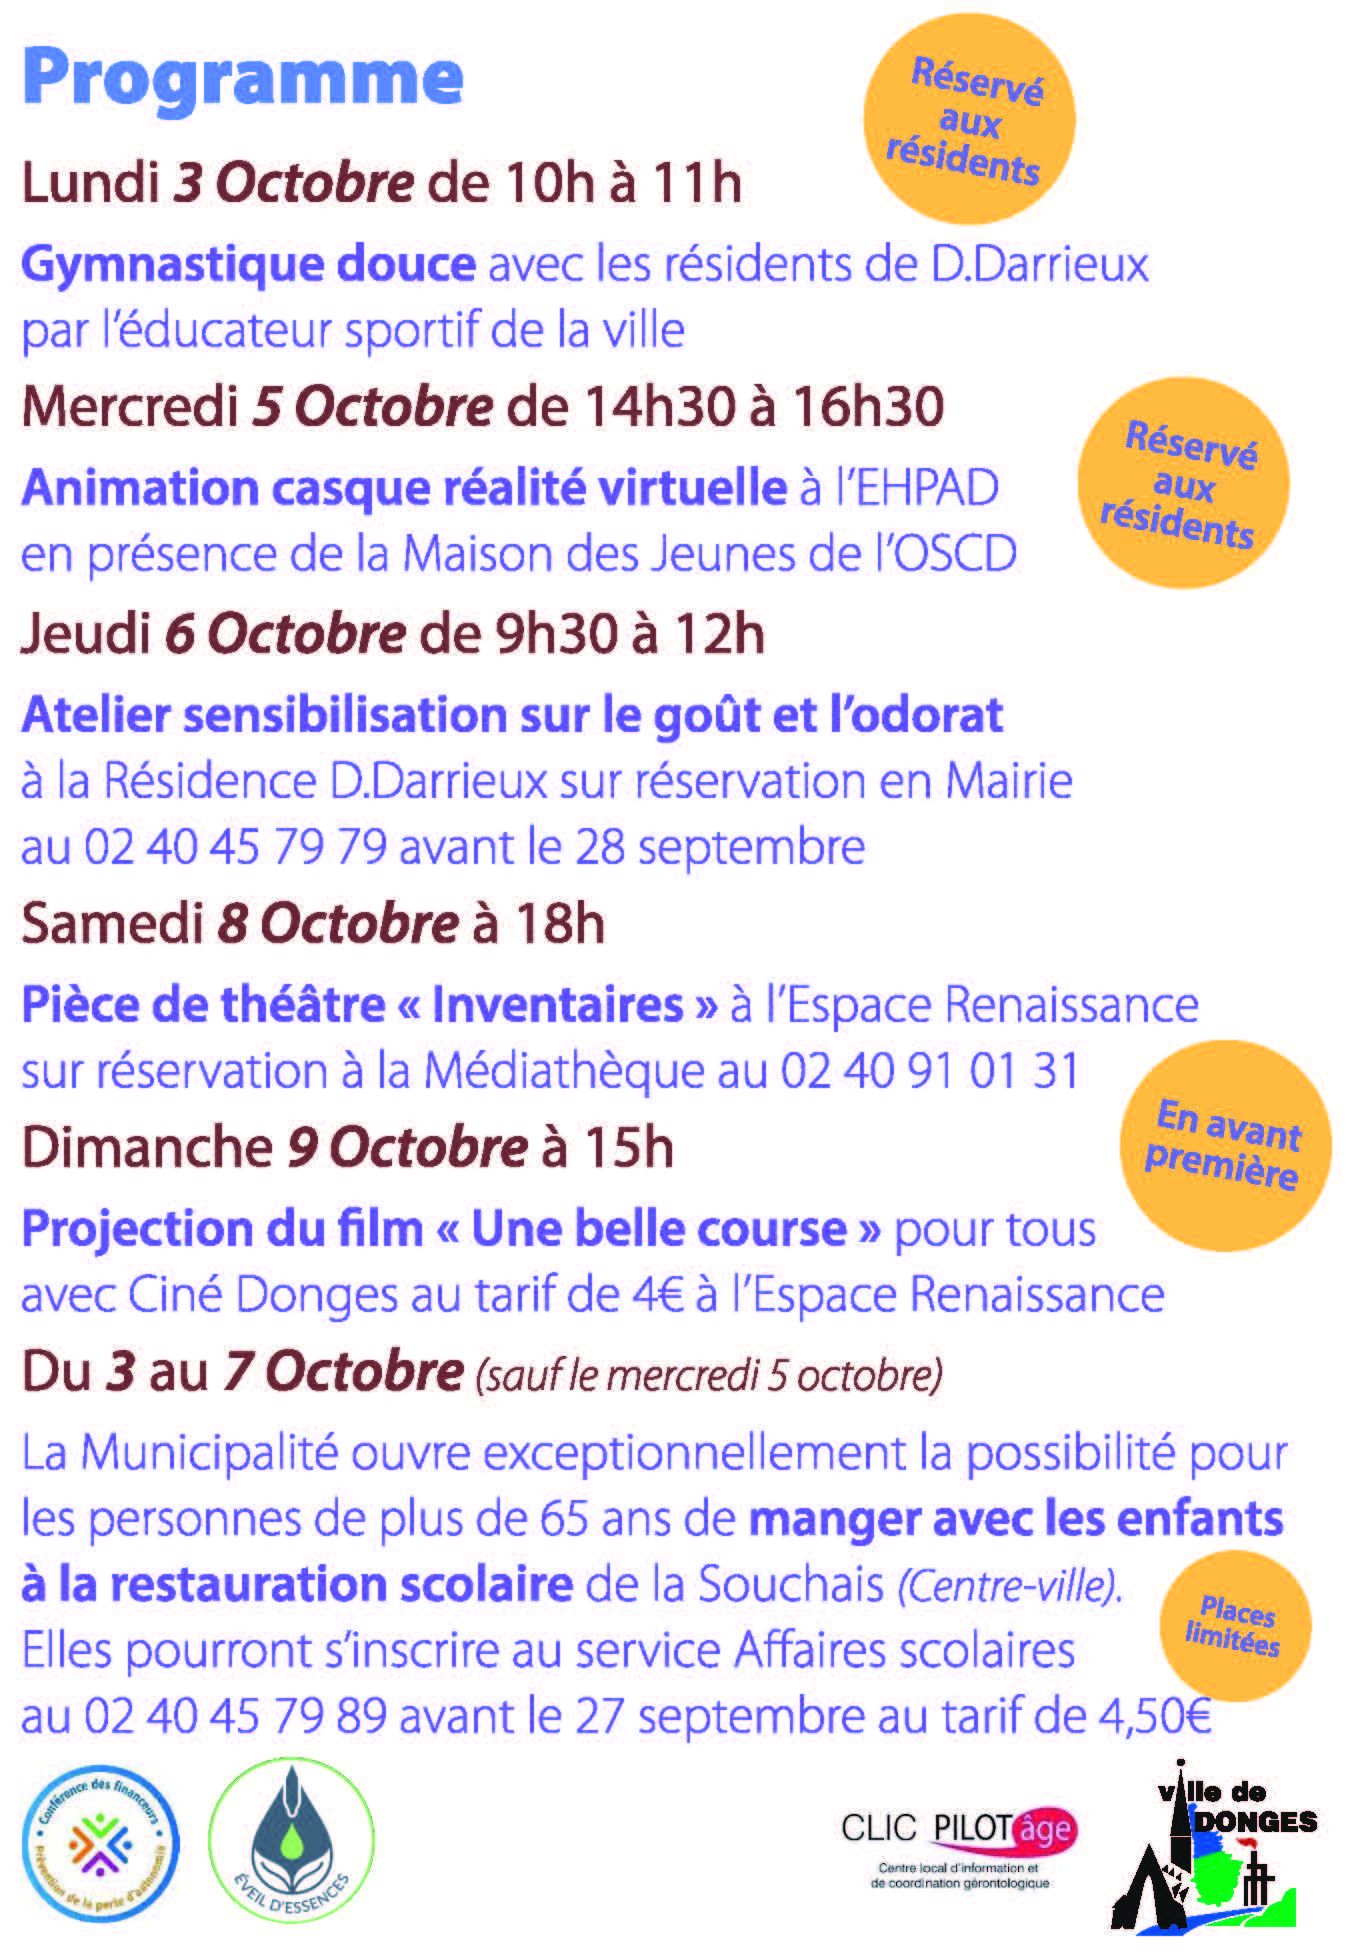 Programme_semaine_bleue_Page_2.jpg